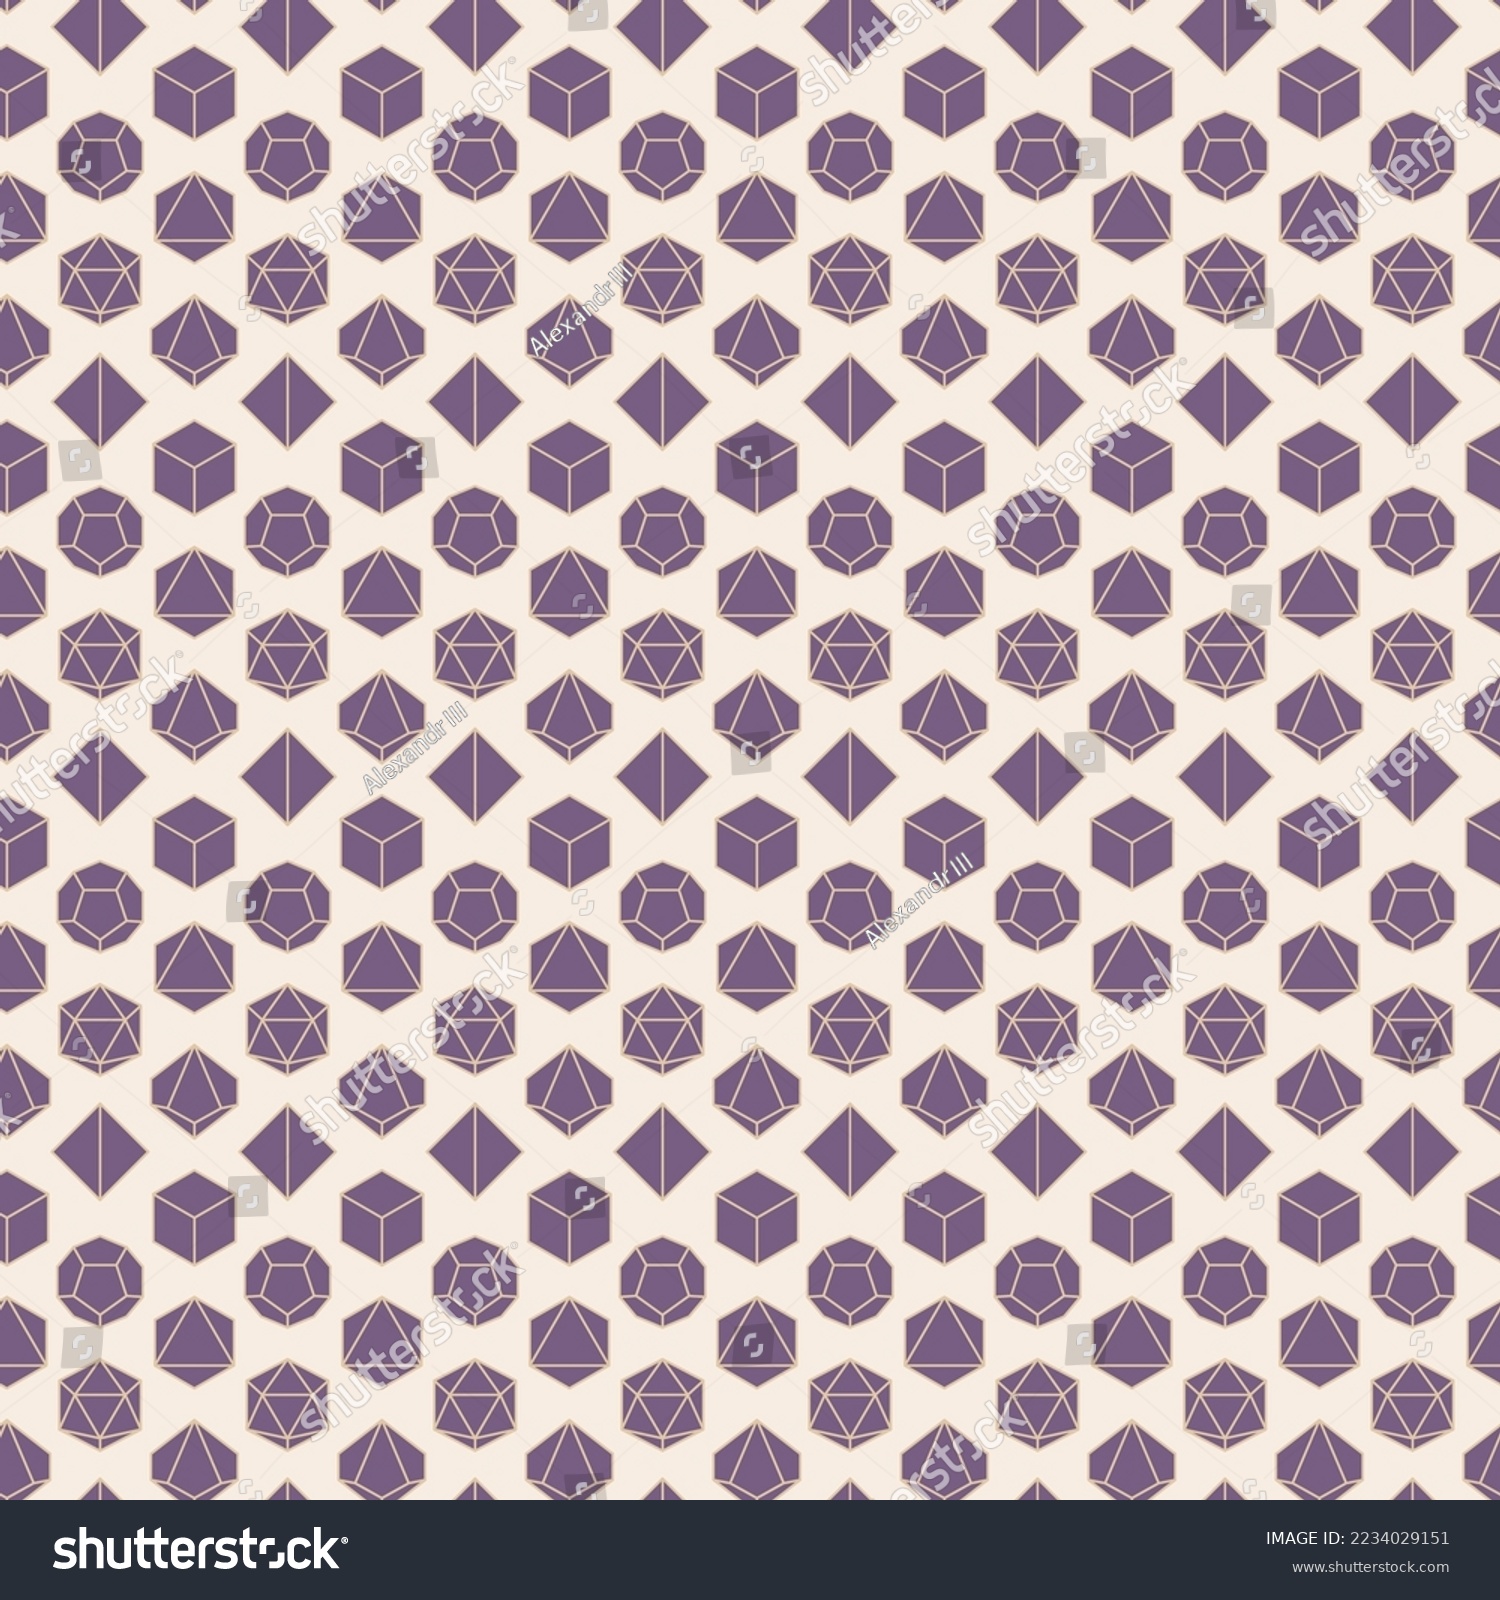 SVG of Seamless Pattern of D4, D6, D8, D10, D12, and D20 Dice for Board Games svg